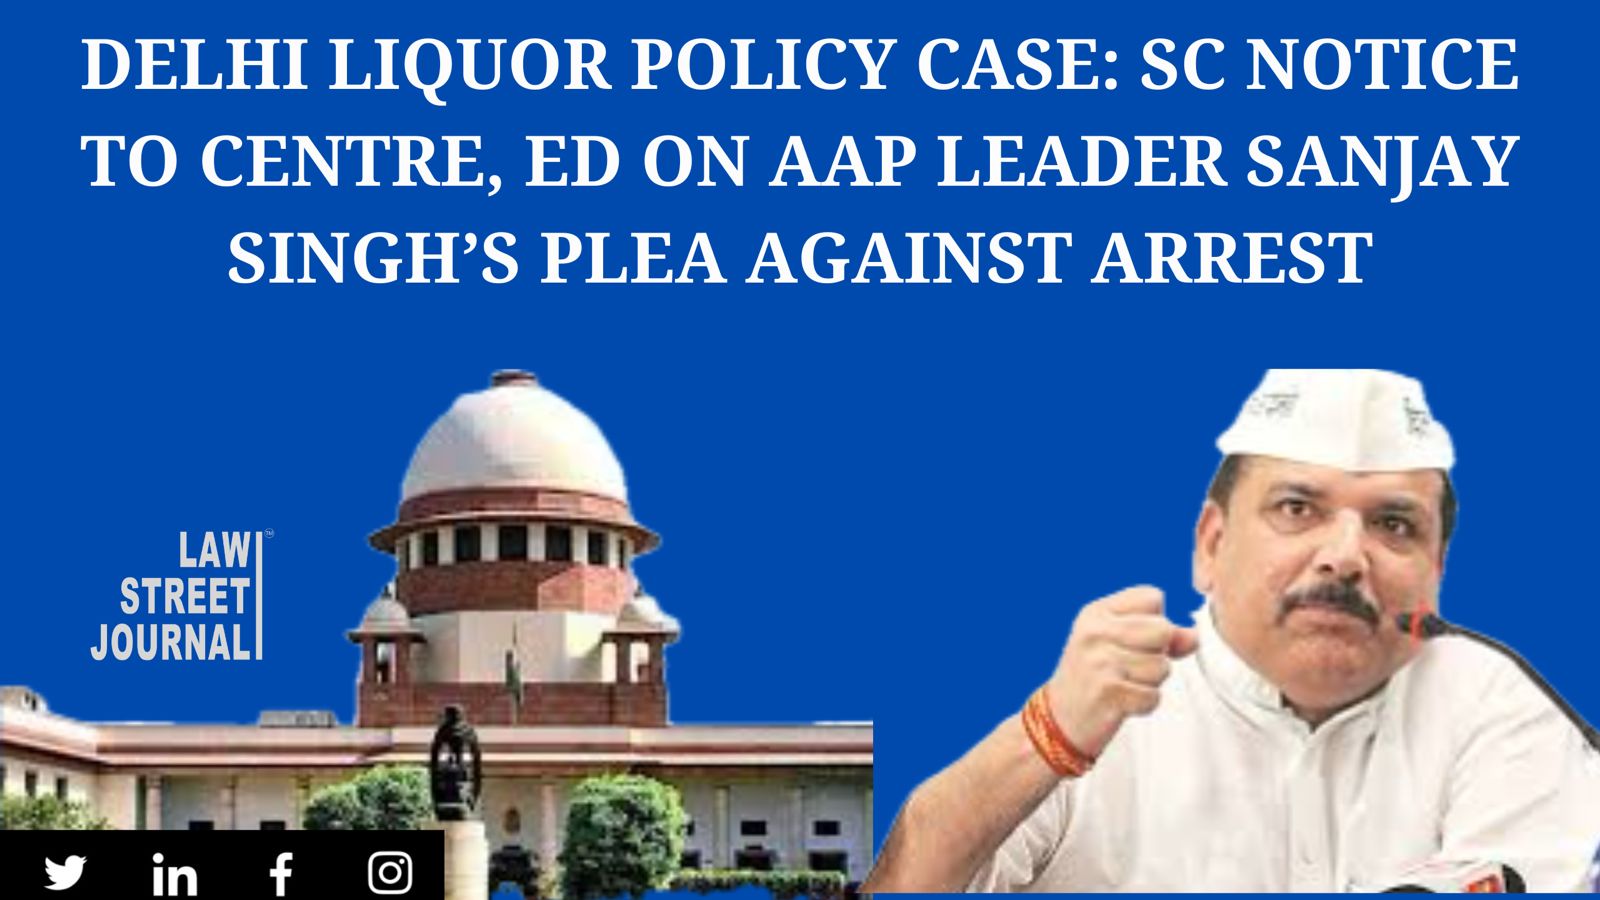 Delhi Liquor Policy case: Supreme Court issues notice to Centre, ED on AAP leader Sanjay Singh’s plea against arrest